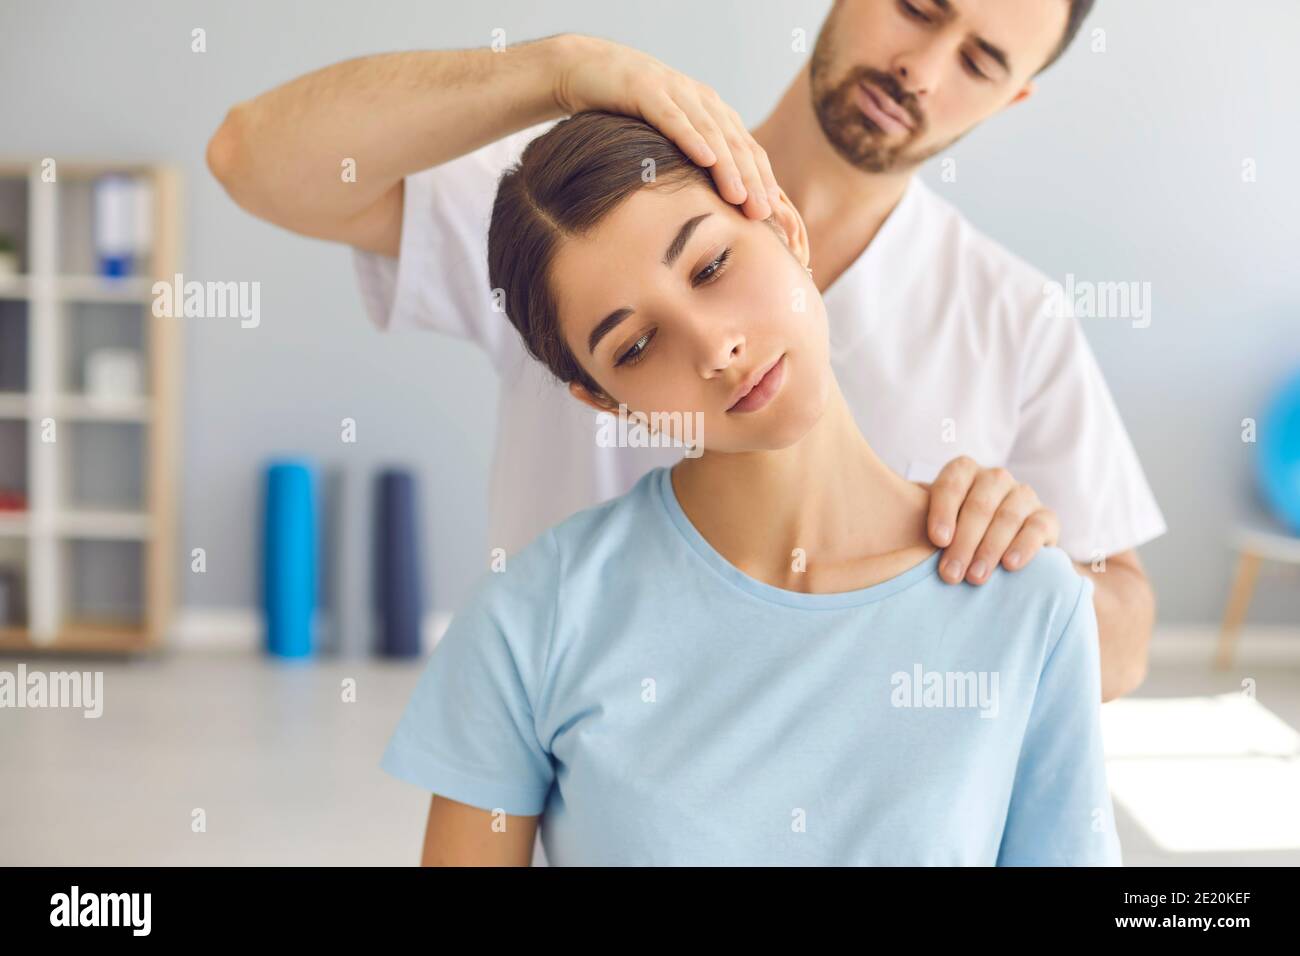 Man doctor chiropractor or osteopath setting womans neck joints with hands during visit and treatment Stock Photo